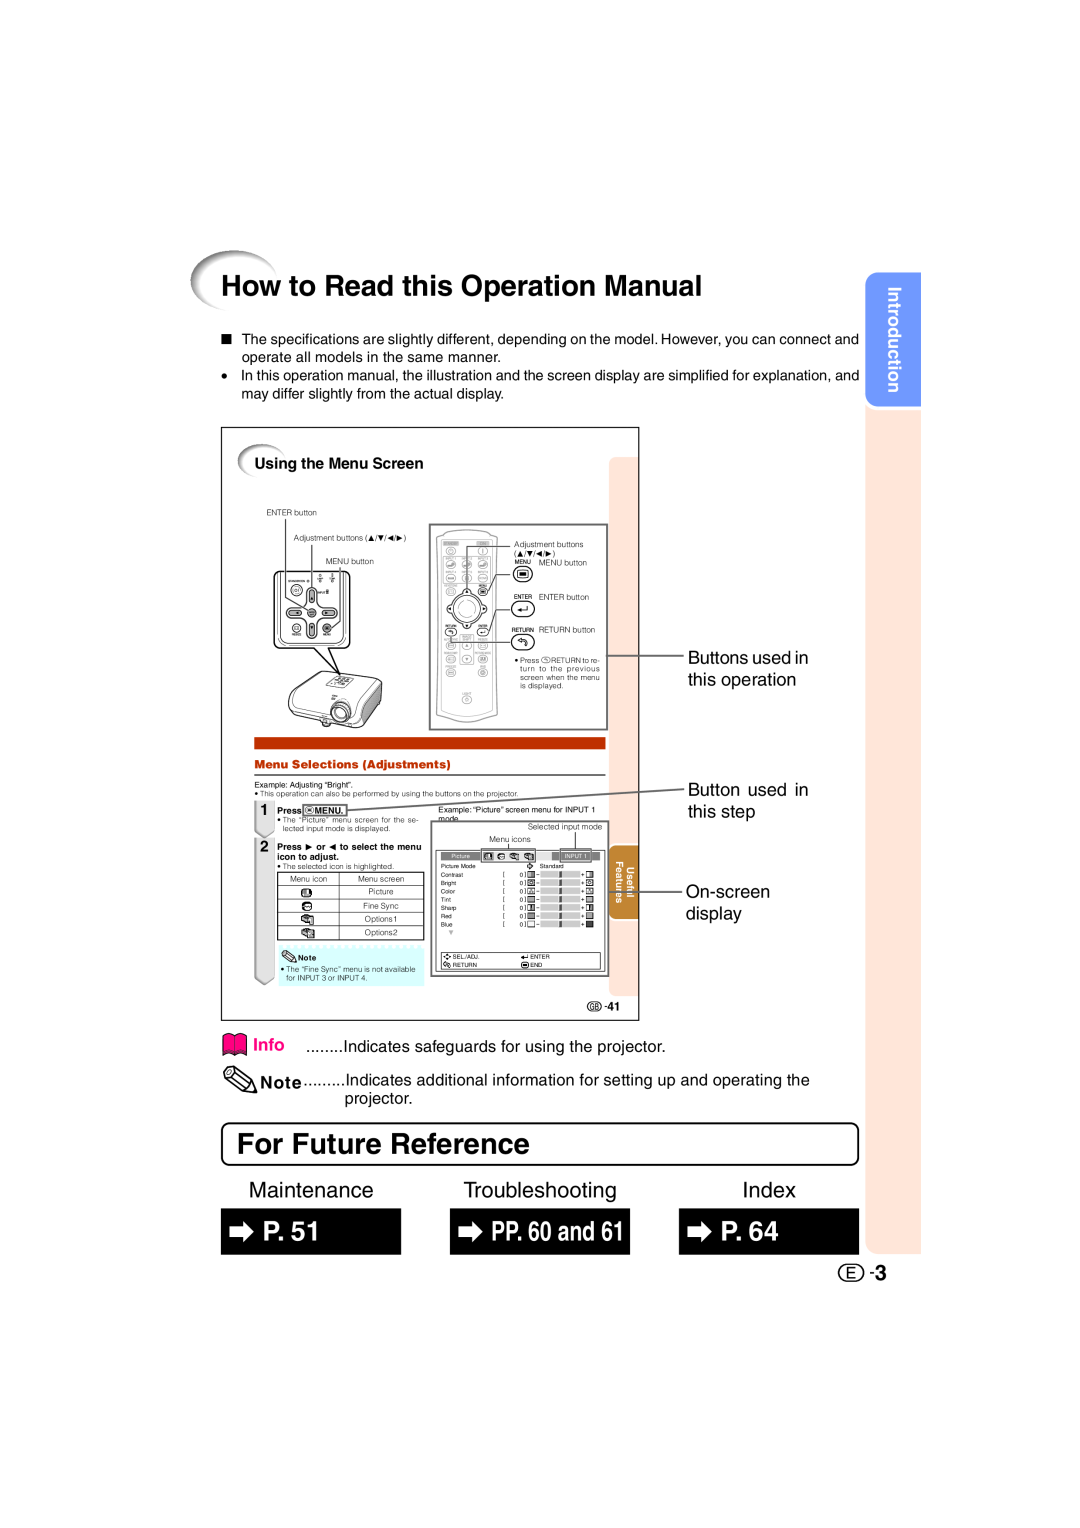 Sharp XV-Z3000U How to Read this Operation Manual, For Future Reference, PP. 60 and, Introduction, Maintenance, Index 